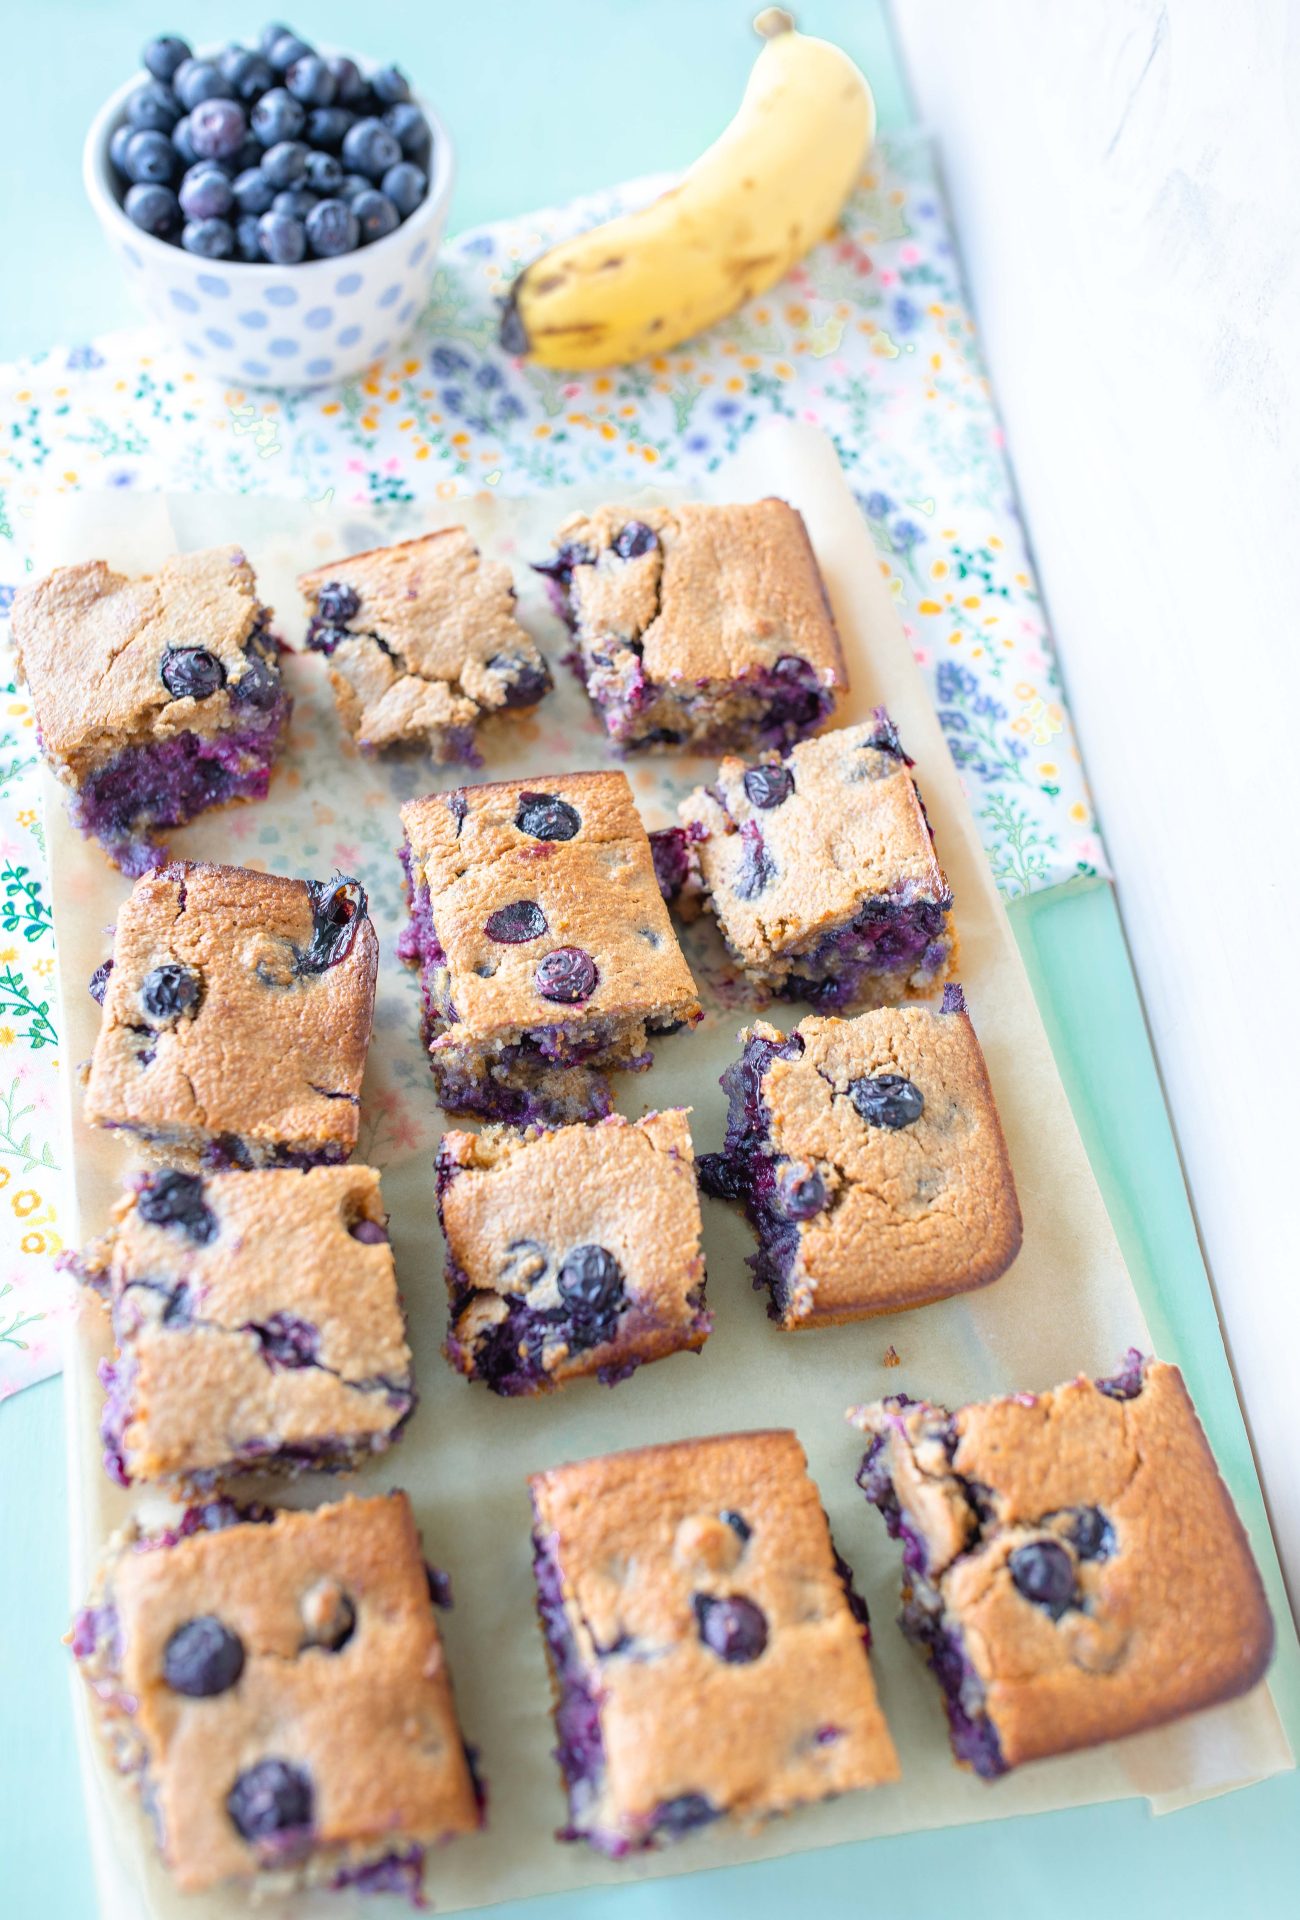 blender bars, breakfast, easy baking, easy to bake, gluten-free, dairy-free, blender muffins, blueberry, almond butter, brunch, healthy recipes, healthy food, muffins, muffin bars